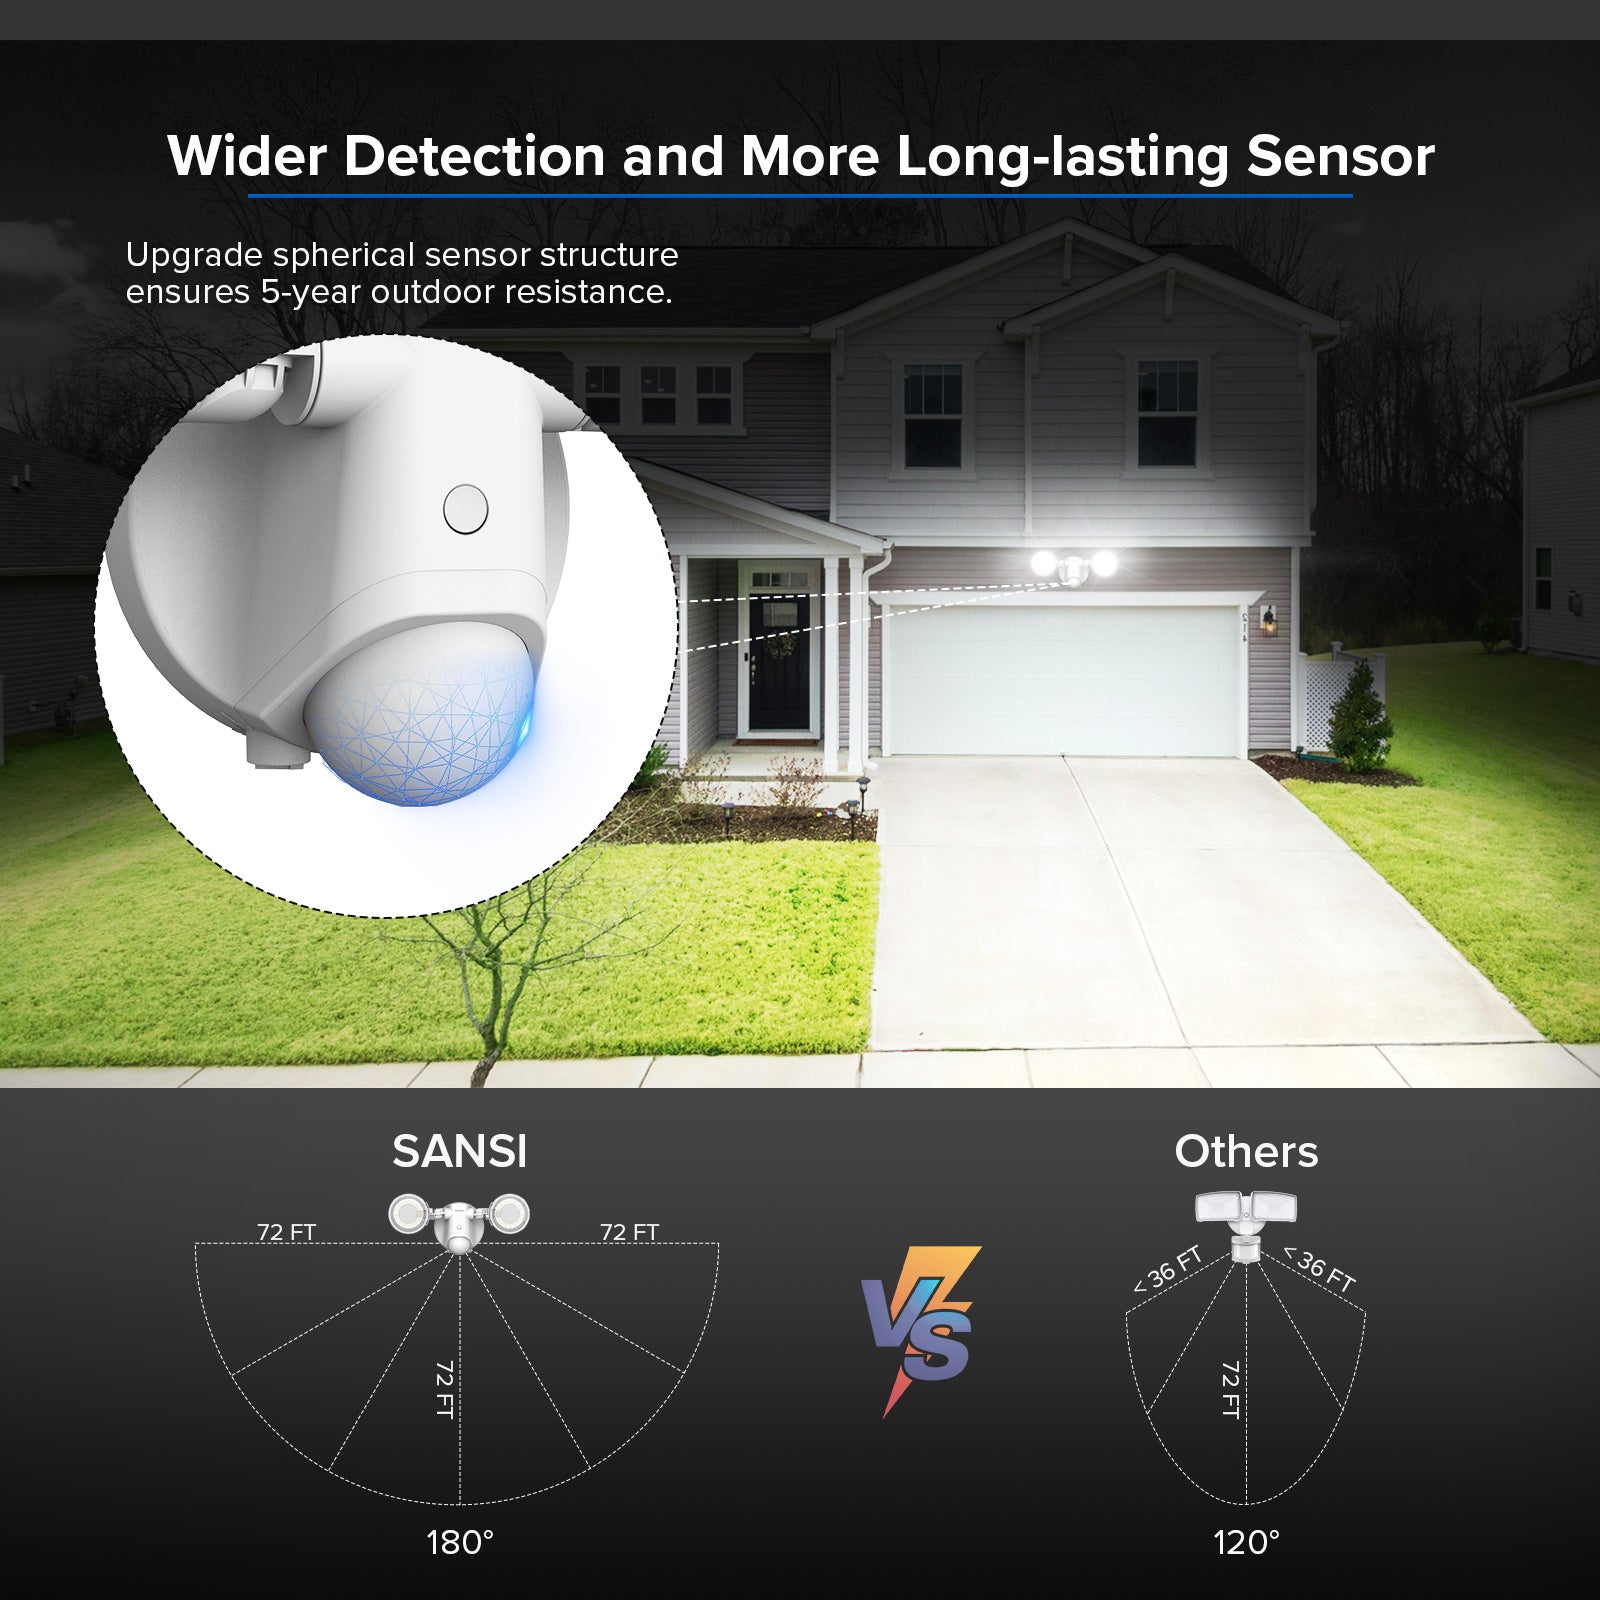 Upgraded 30W LED Security Light (Motion Sensor) has wider detection and more long-lasting sensor